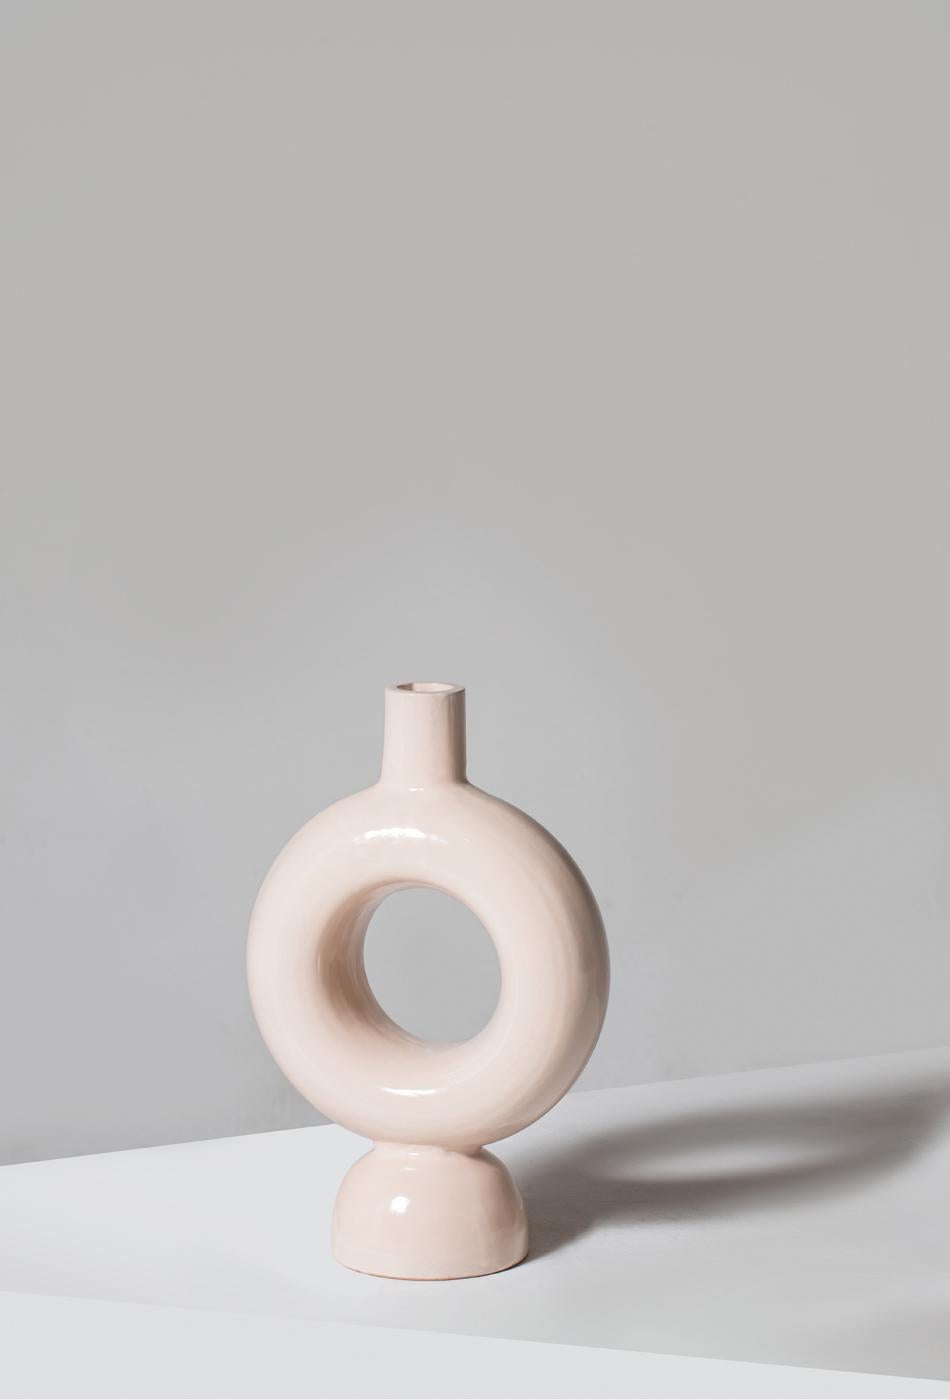 Glazed Earth-Toned Abba Collection of Ceramic Vases Celebrates Ancient Water Urns For Sale